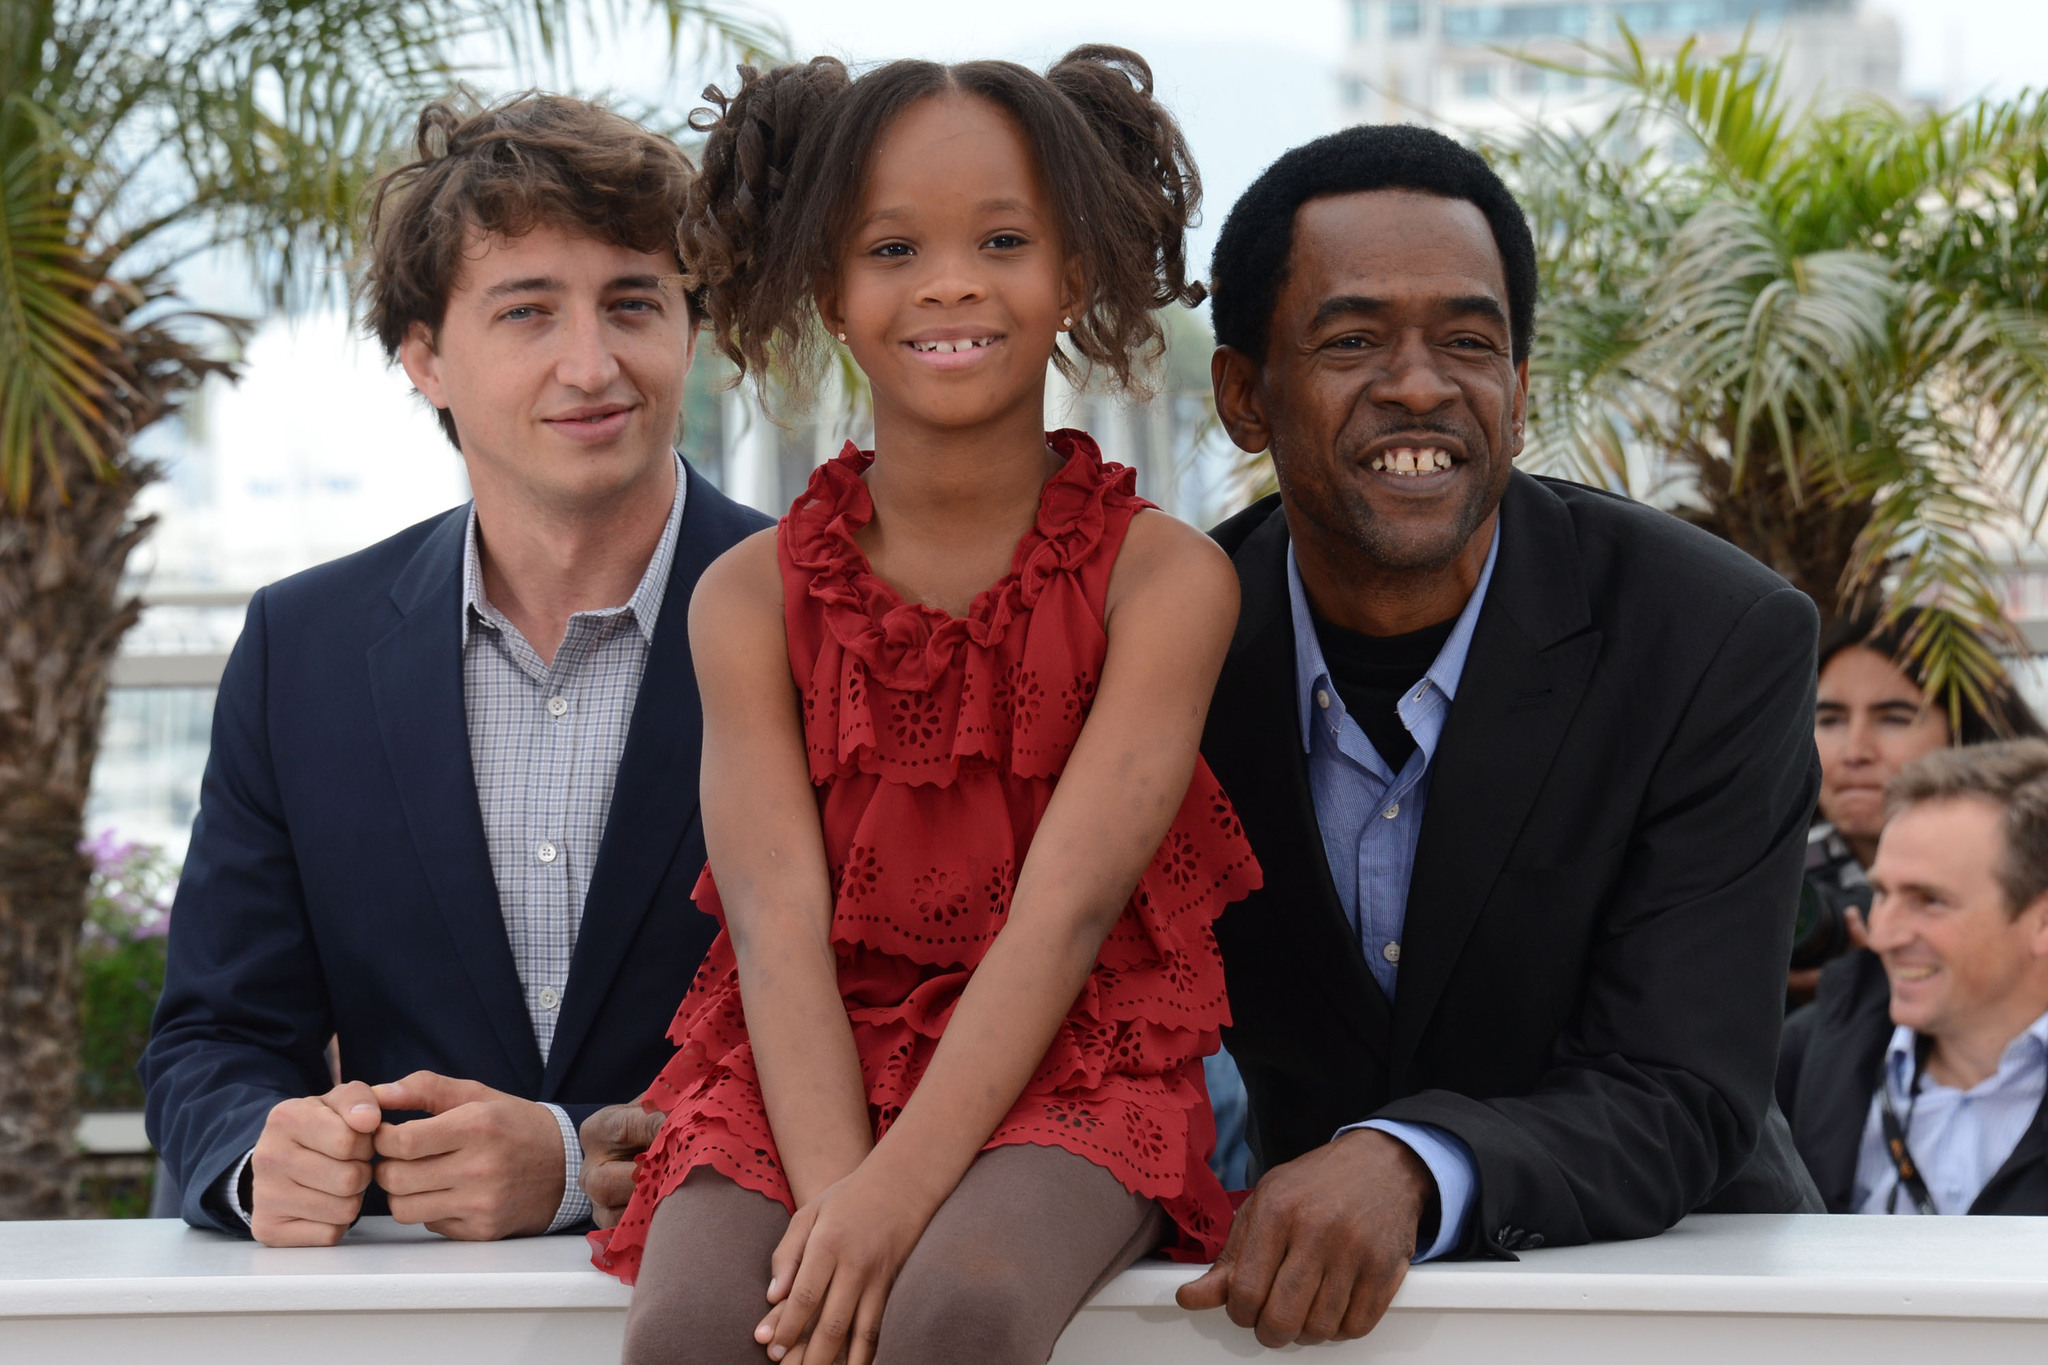 Benh Zeitlin, Quvenzhané Wallis and Dwight Henry at event of Beasts of the Southern Wild (2012)